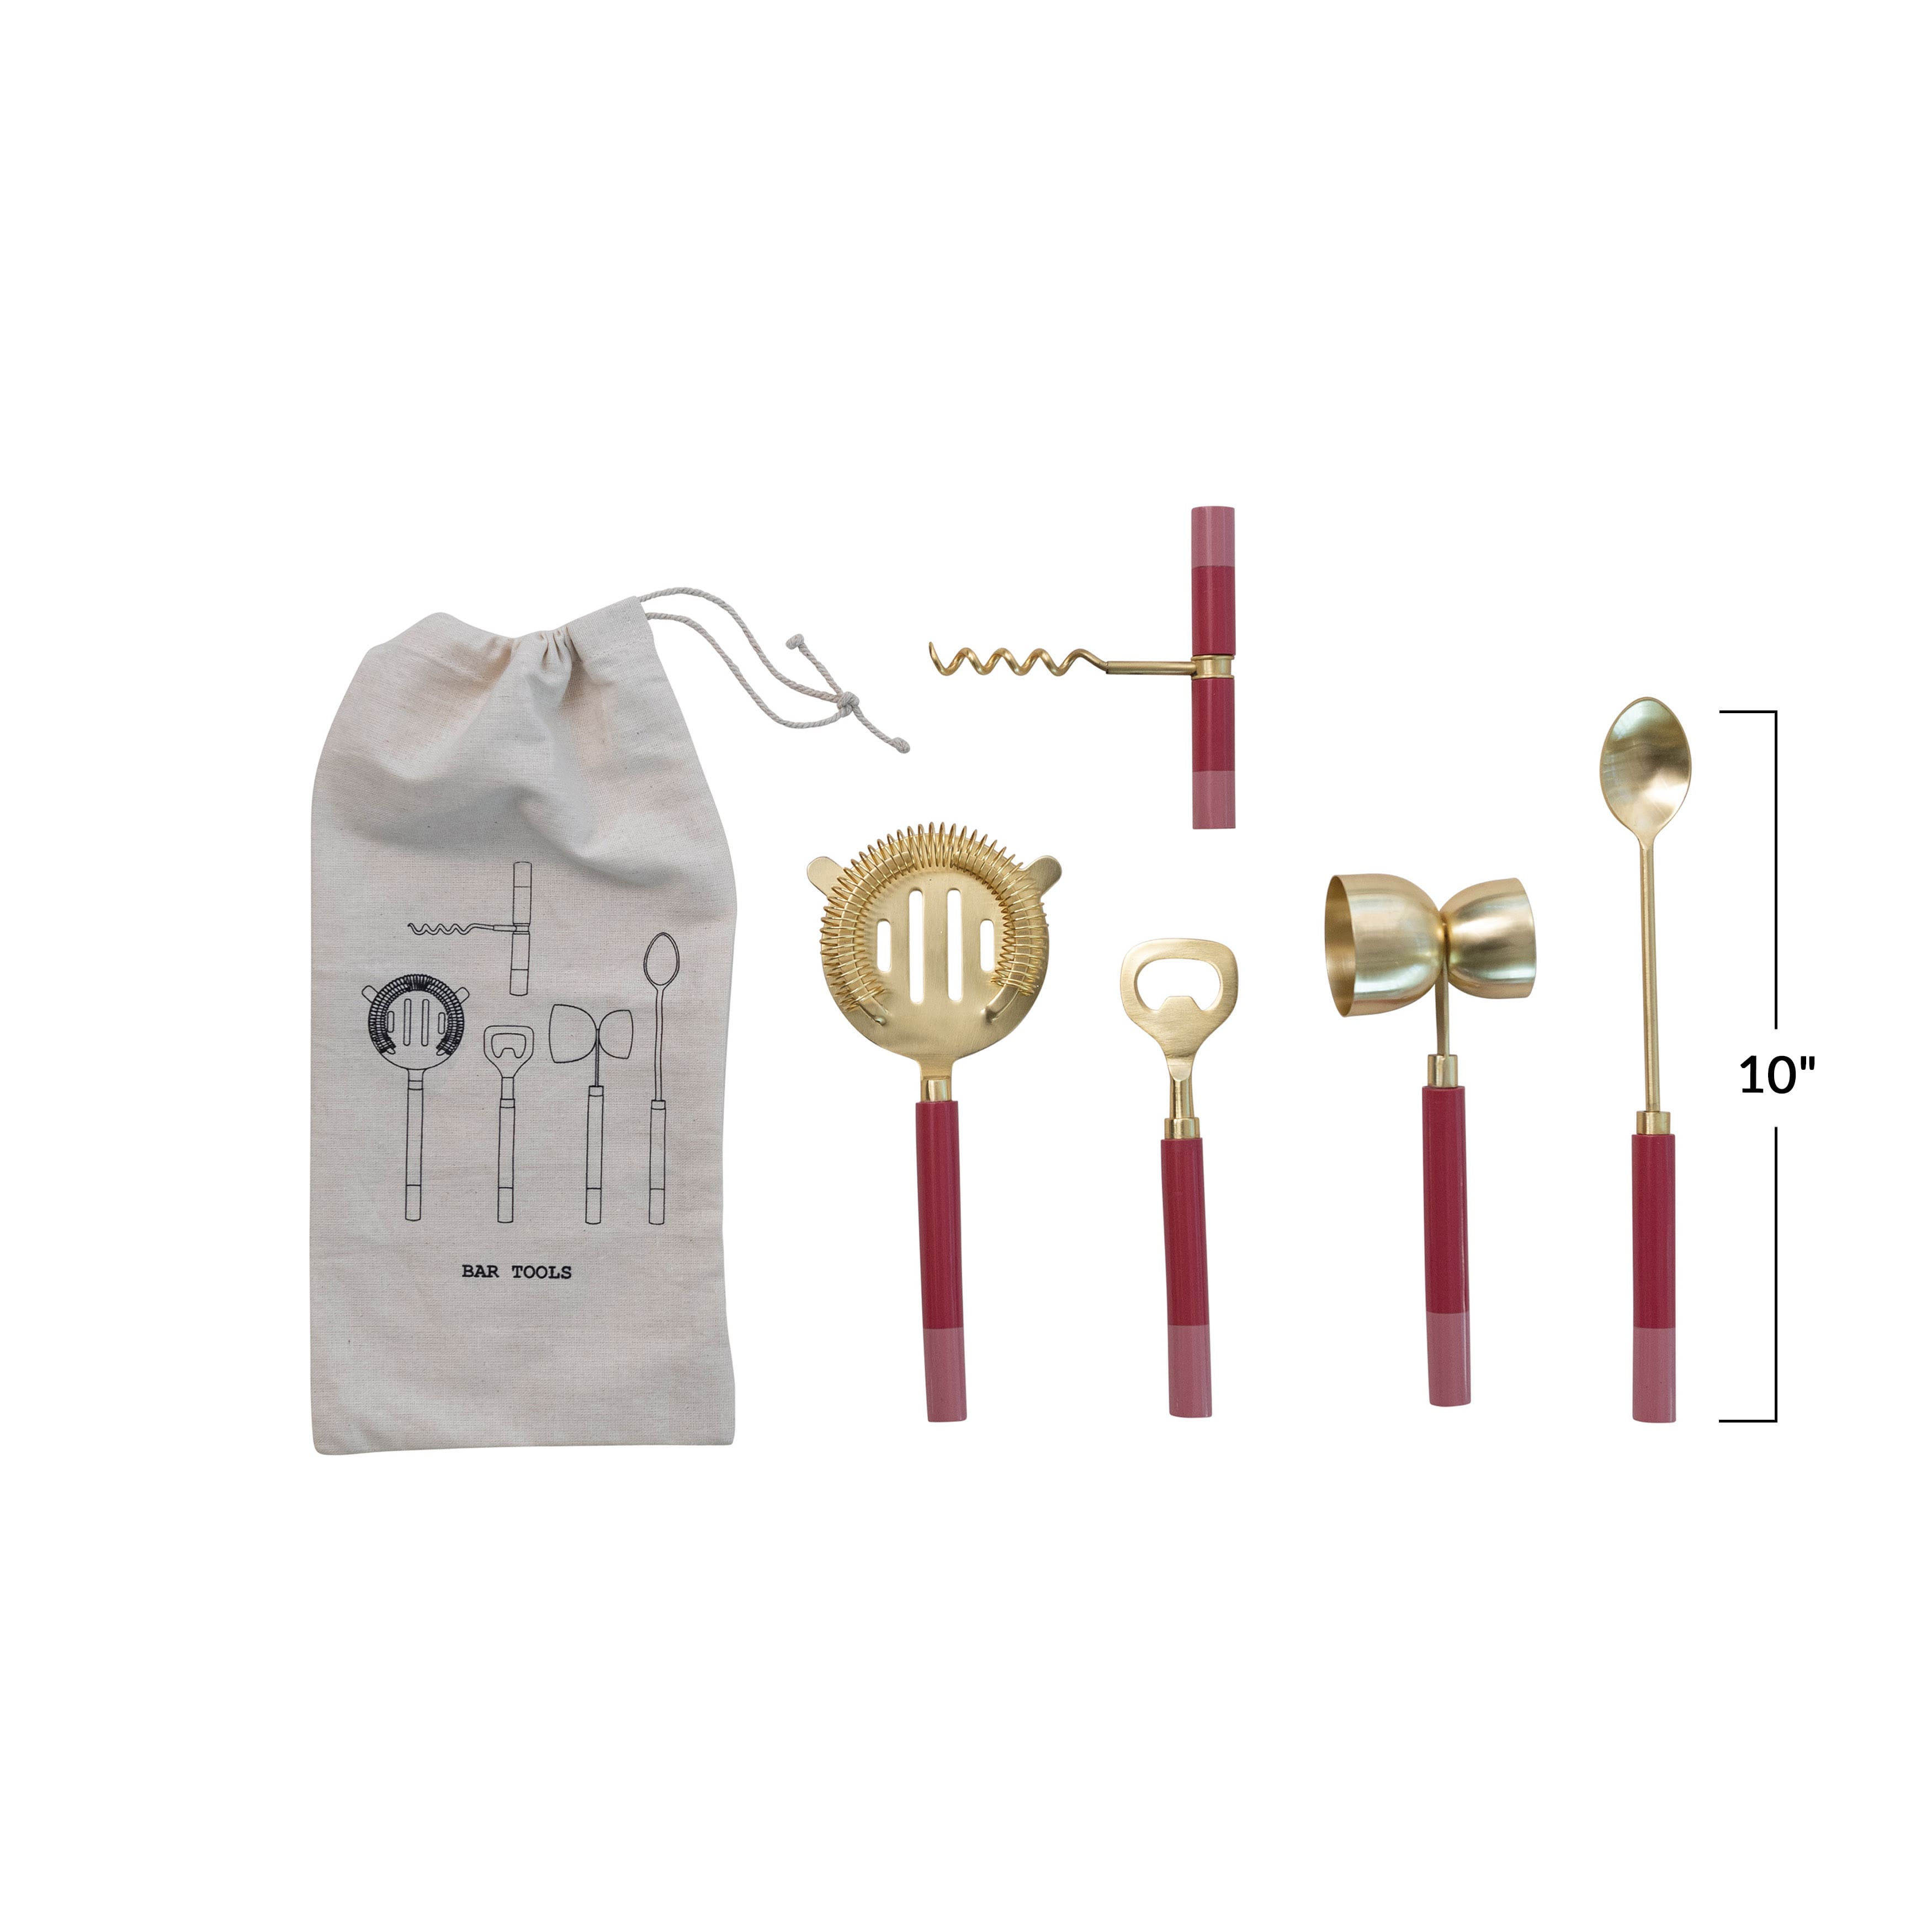 Gold Finish Stainless Steel Bar Tools with Two-Tone Handles in Drawstring Bag